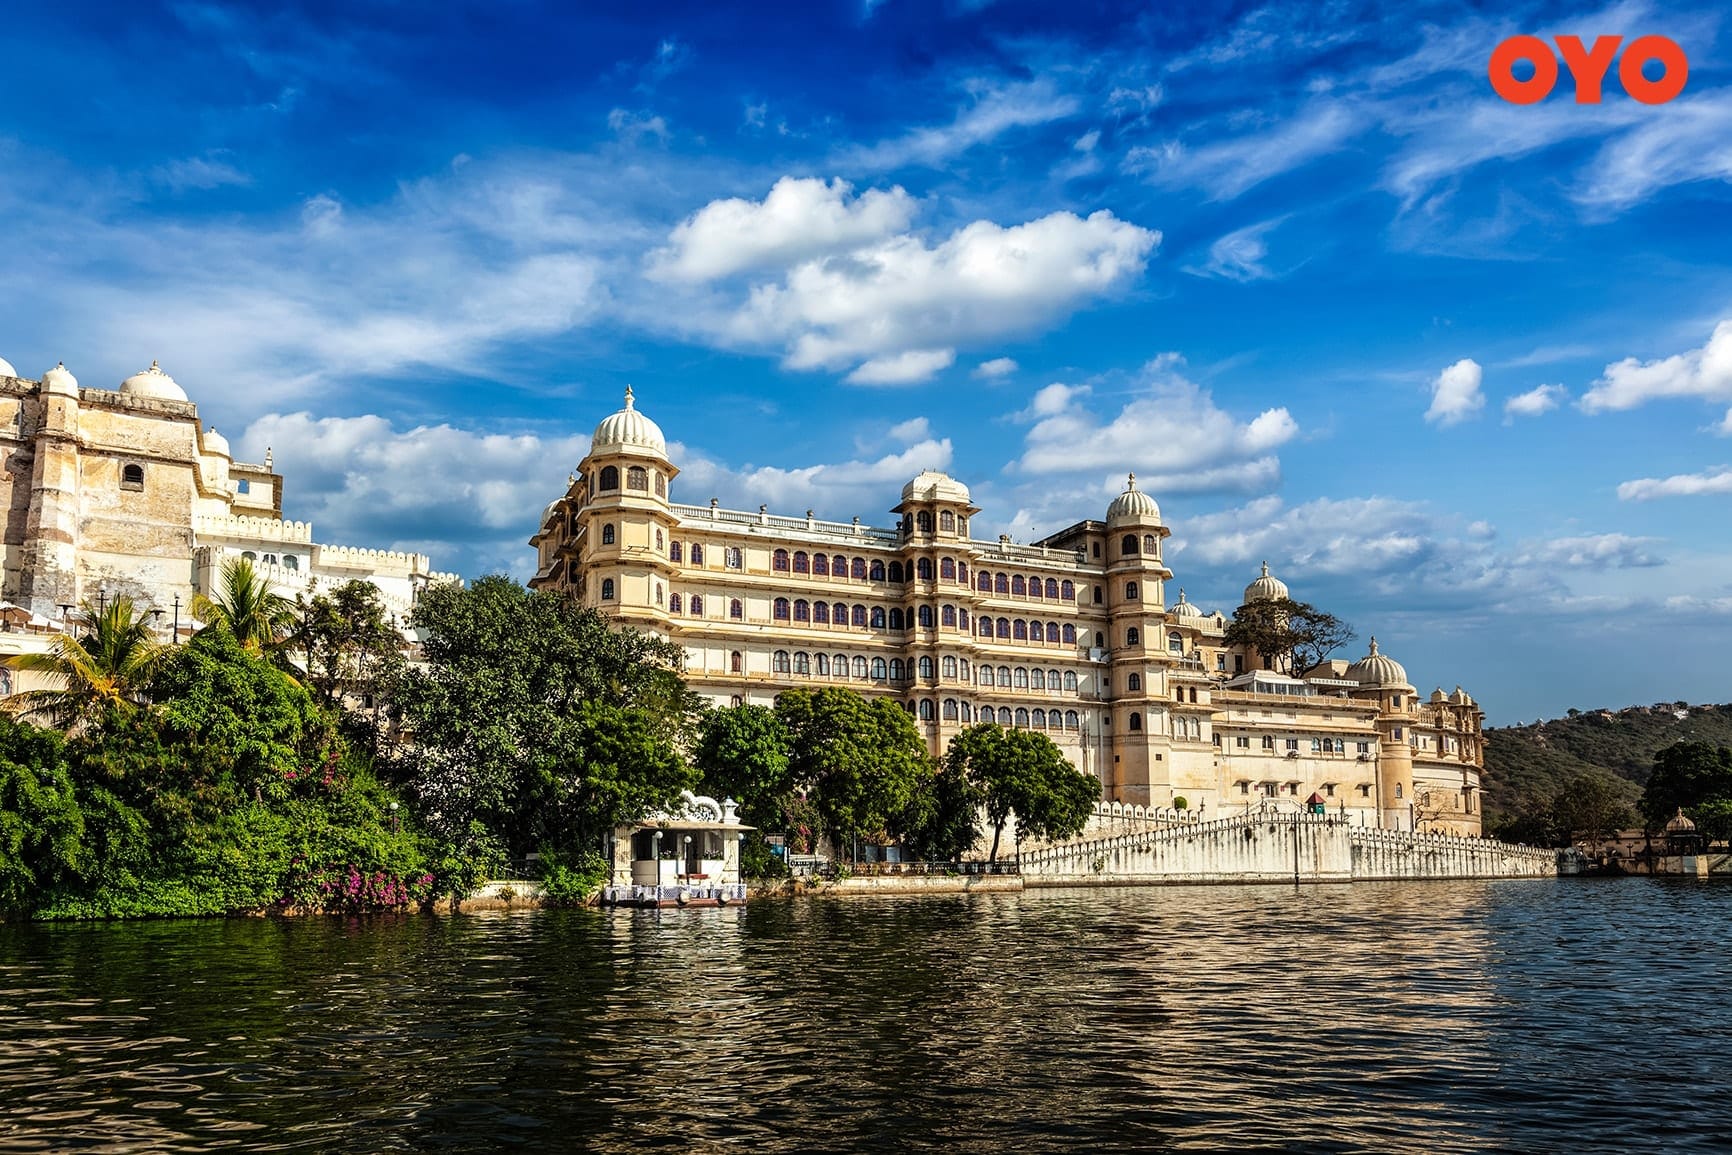 City Palace, Udaipur - One of the most famous palaces in India